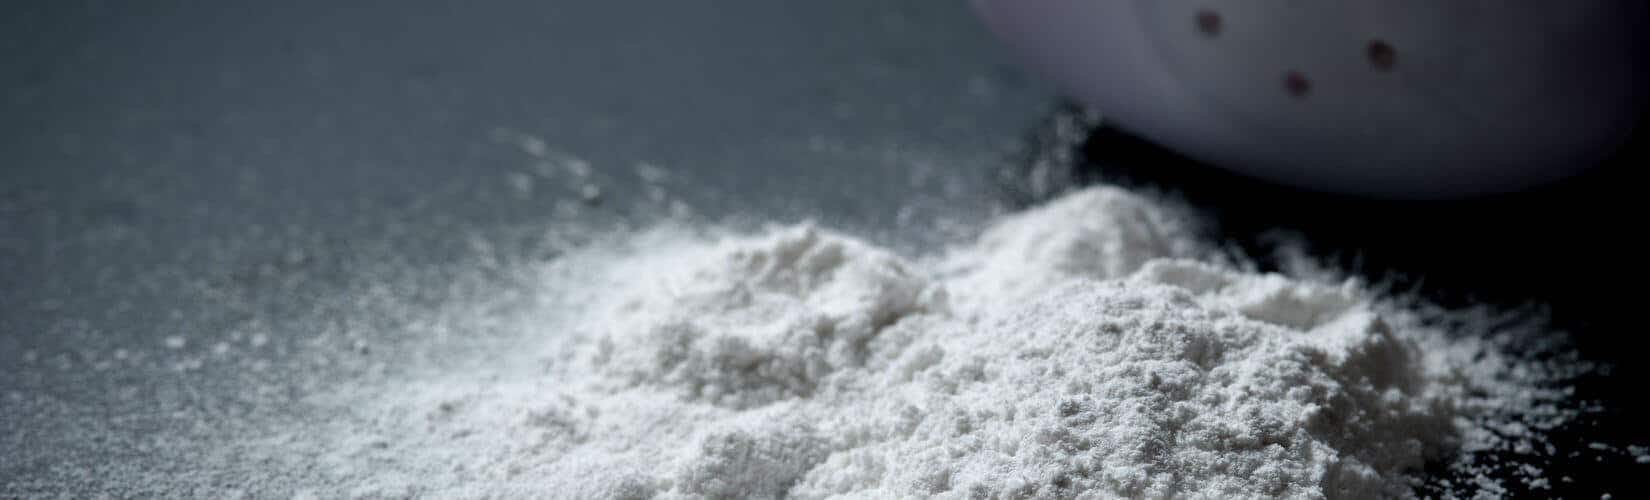 Cosmetic Talc Products & Asbestos Contamination: A New Angle of Litigation